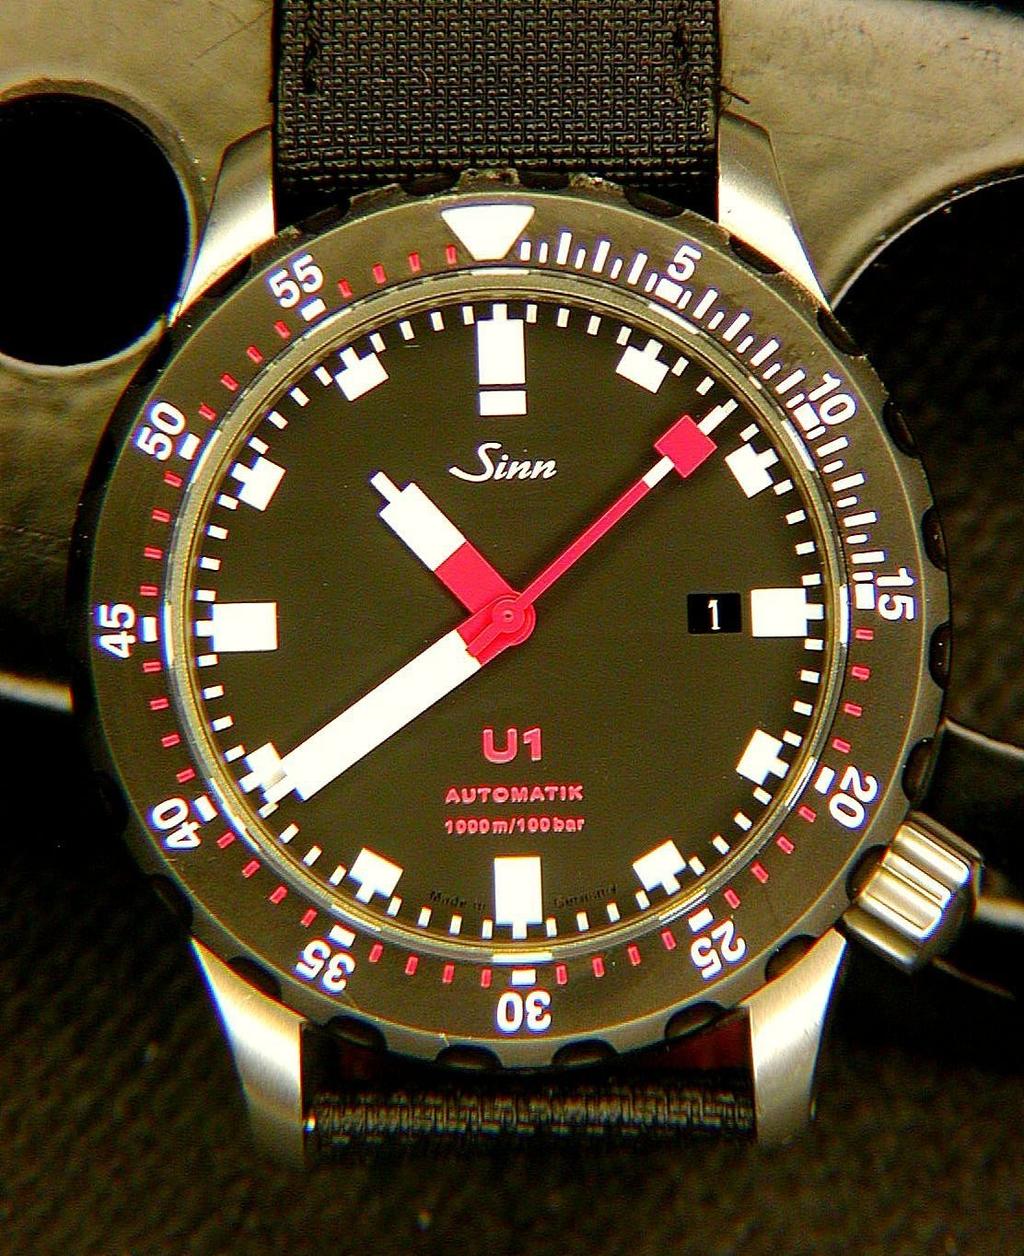 Then apply thread locker and gently tighten the screws. All back together now, it should look like this. 2011 rationaltime There is something satisfying about the construction of the Sinn U1 bezel.